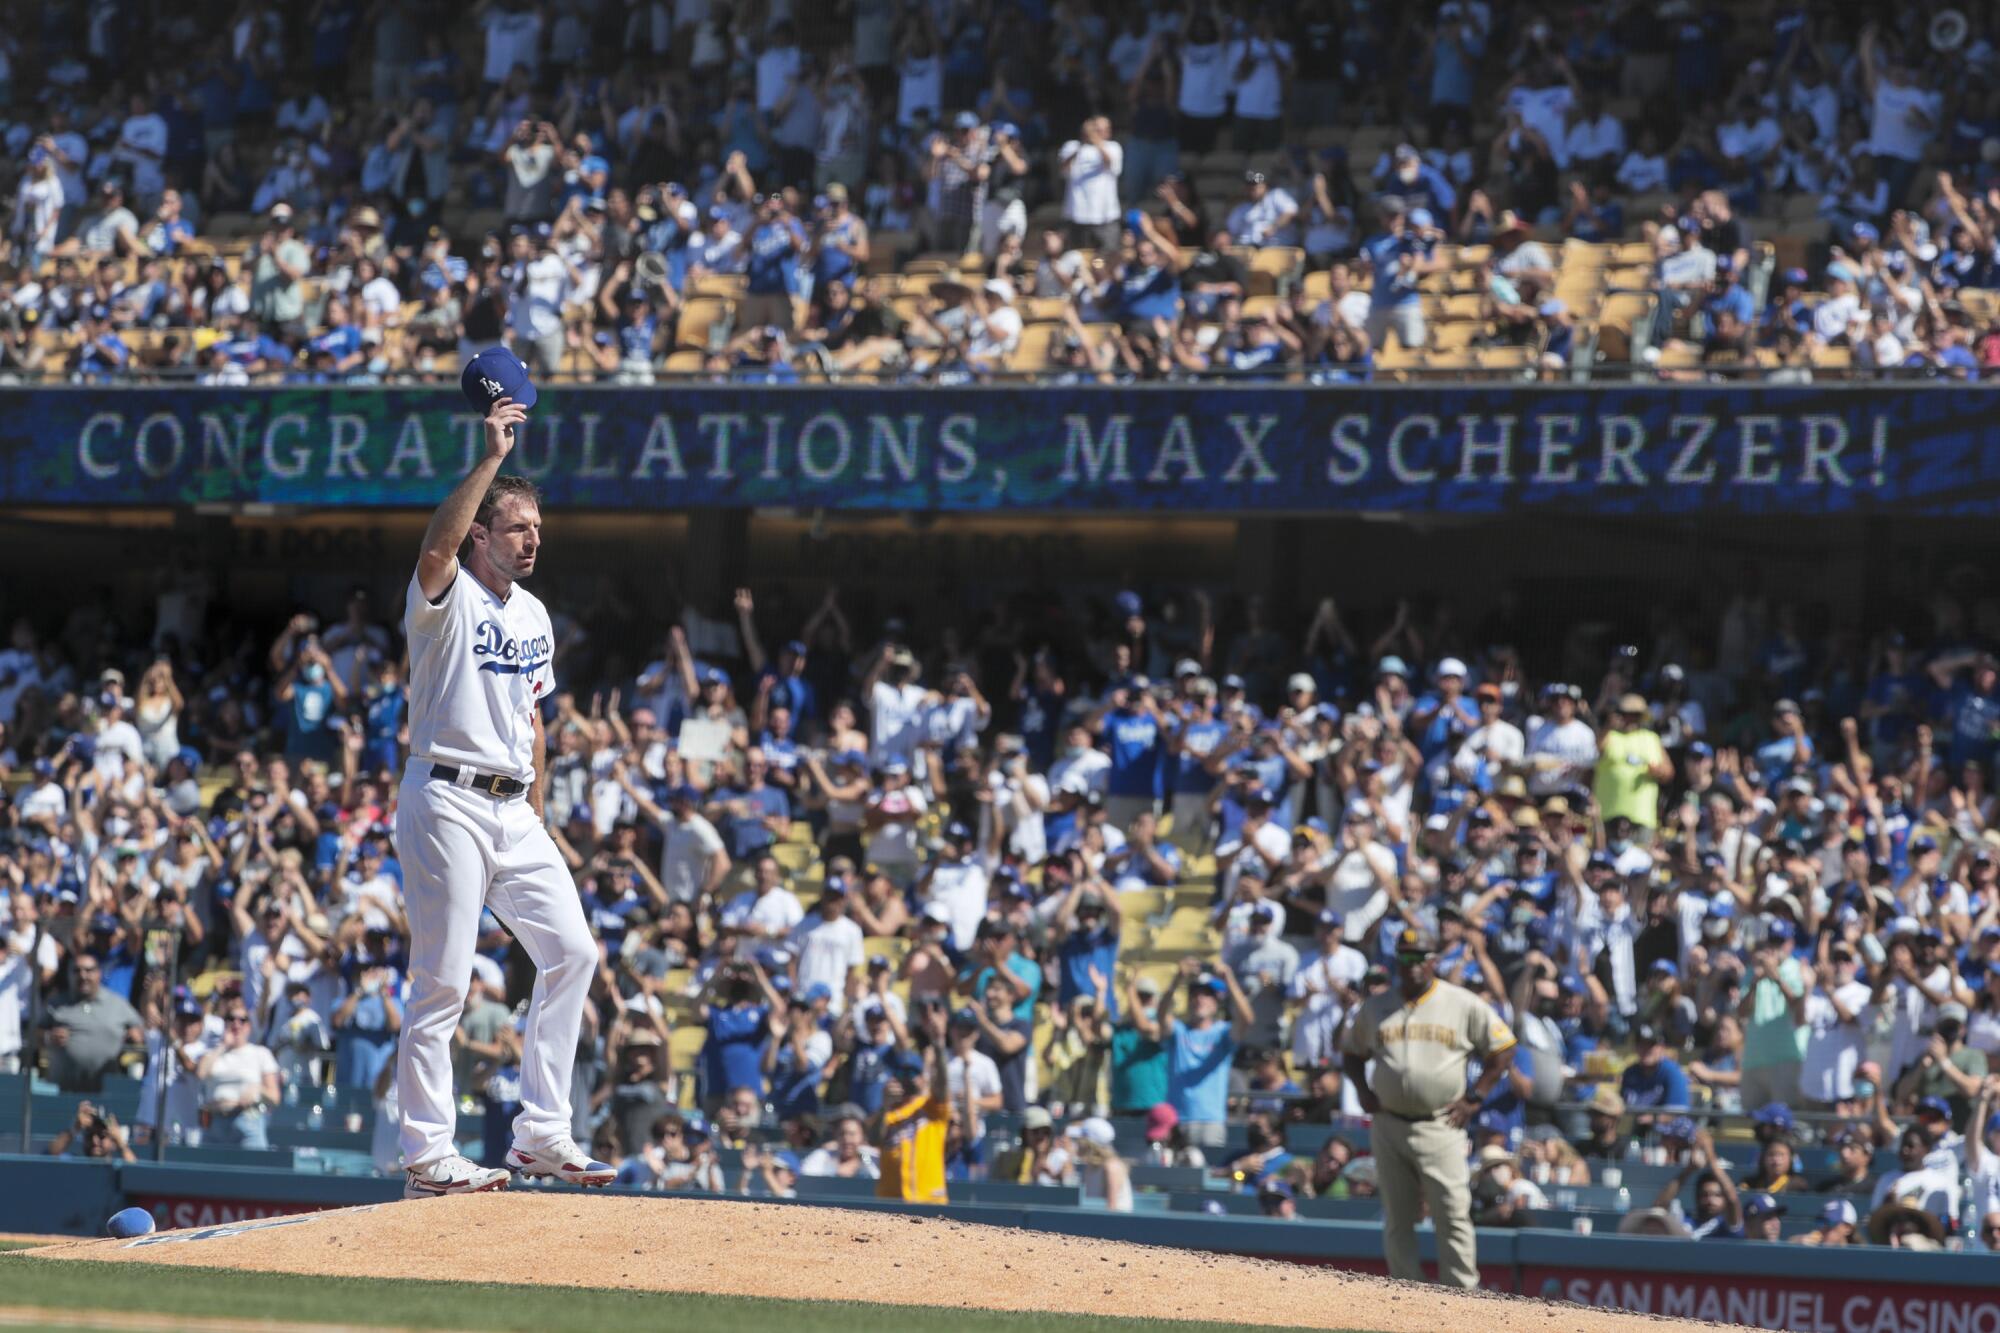 Dodgers starting pitcher Max Scherzer acknowledges a standing ovation from the fans at Dodger Stadium.